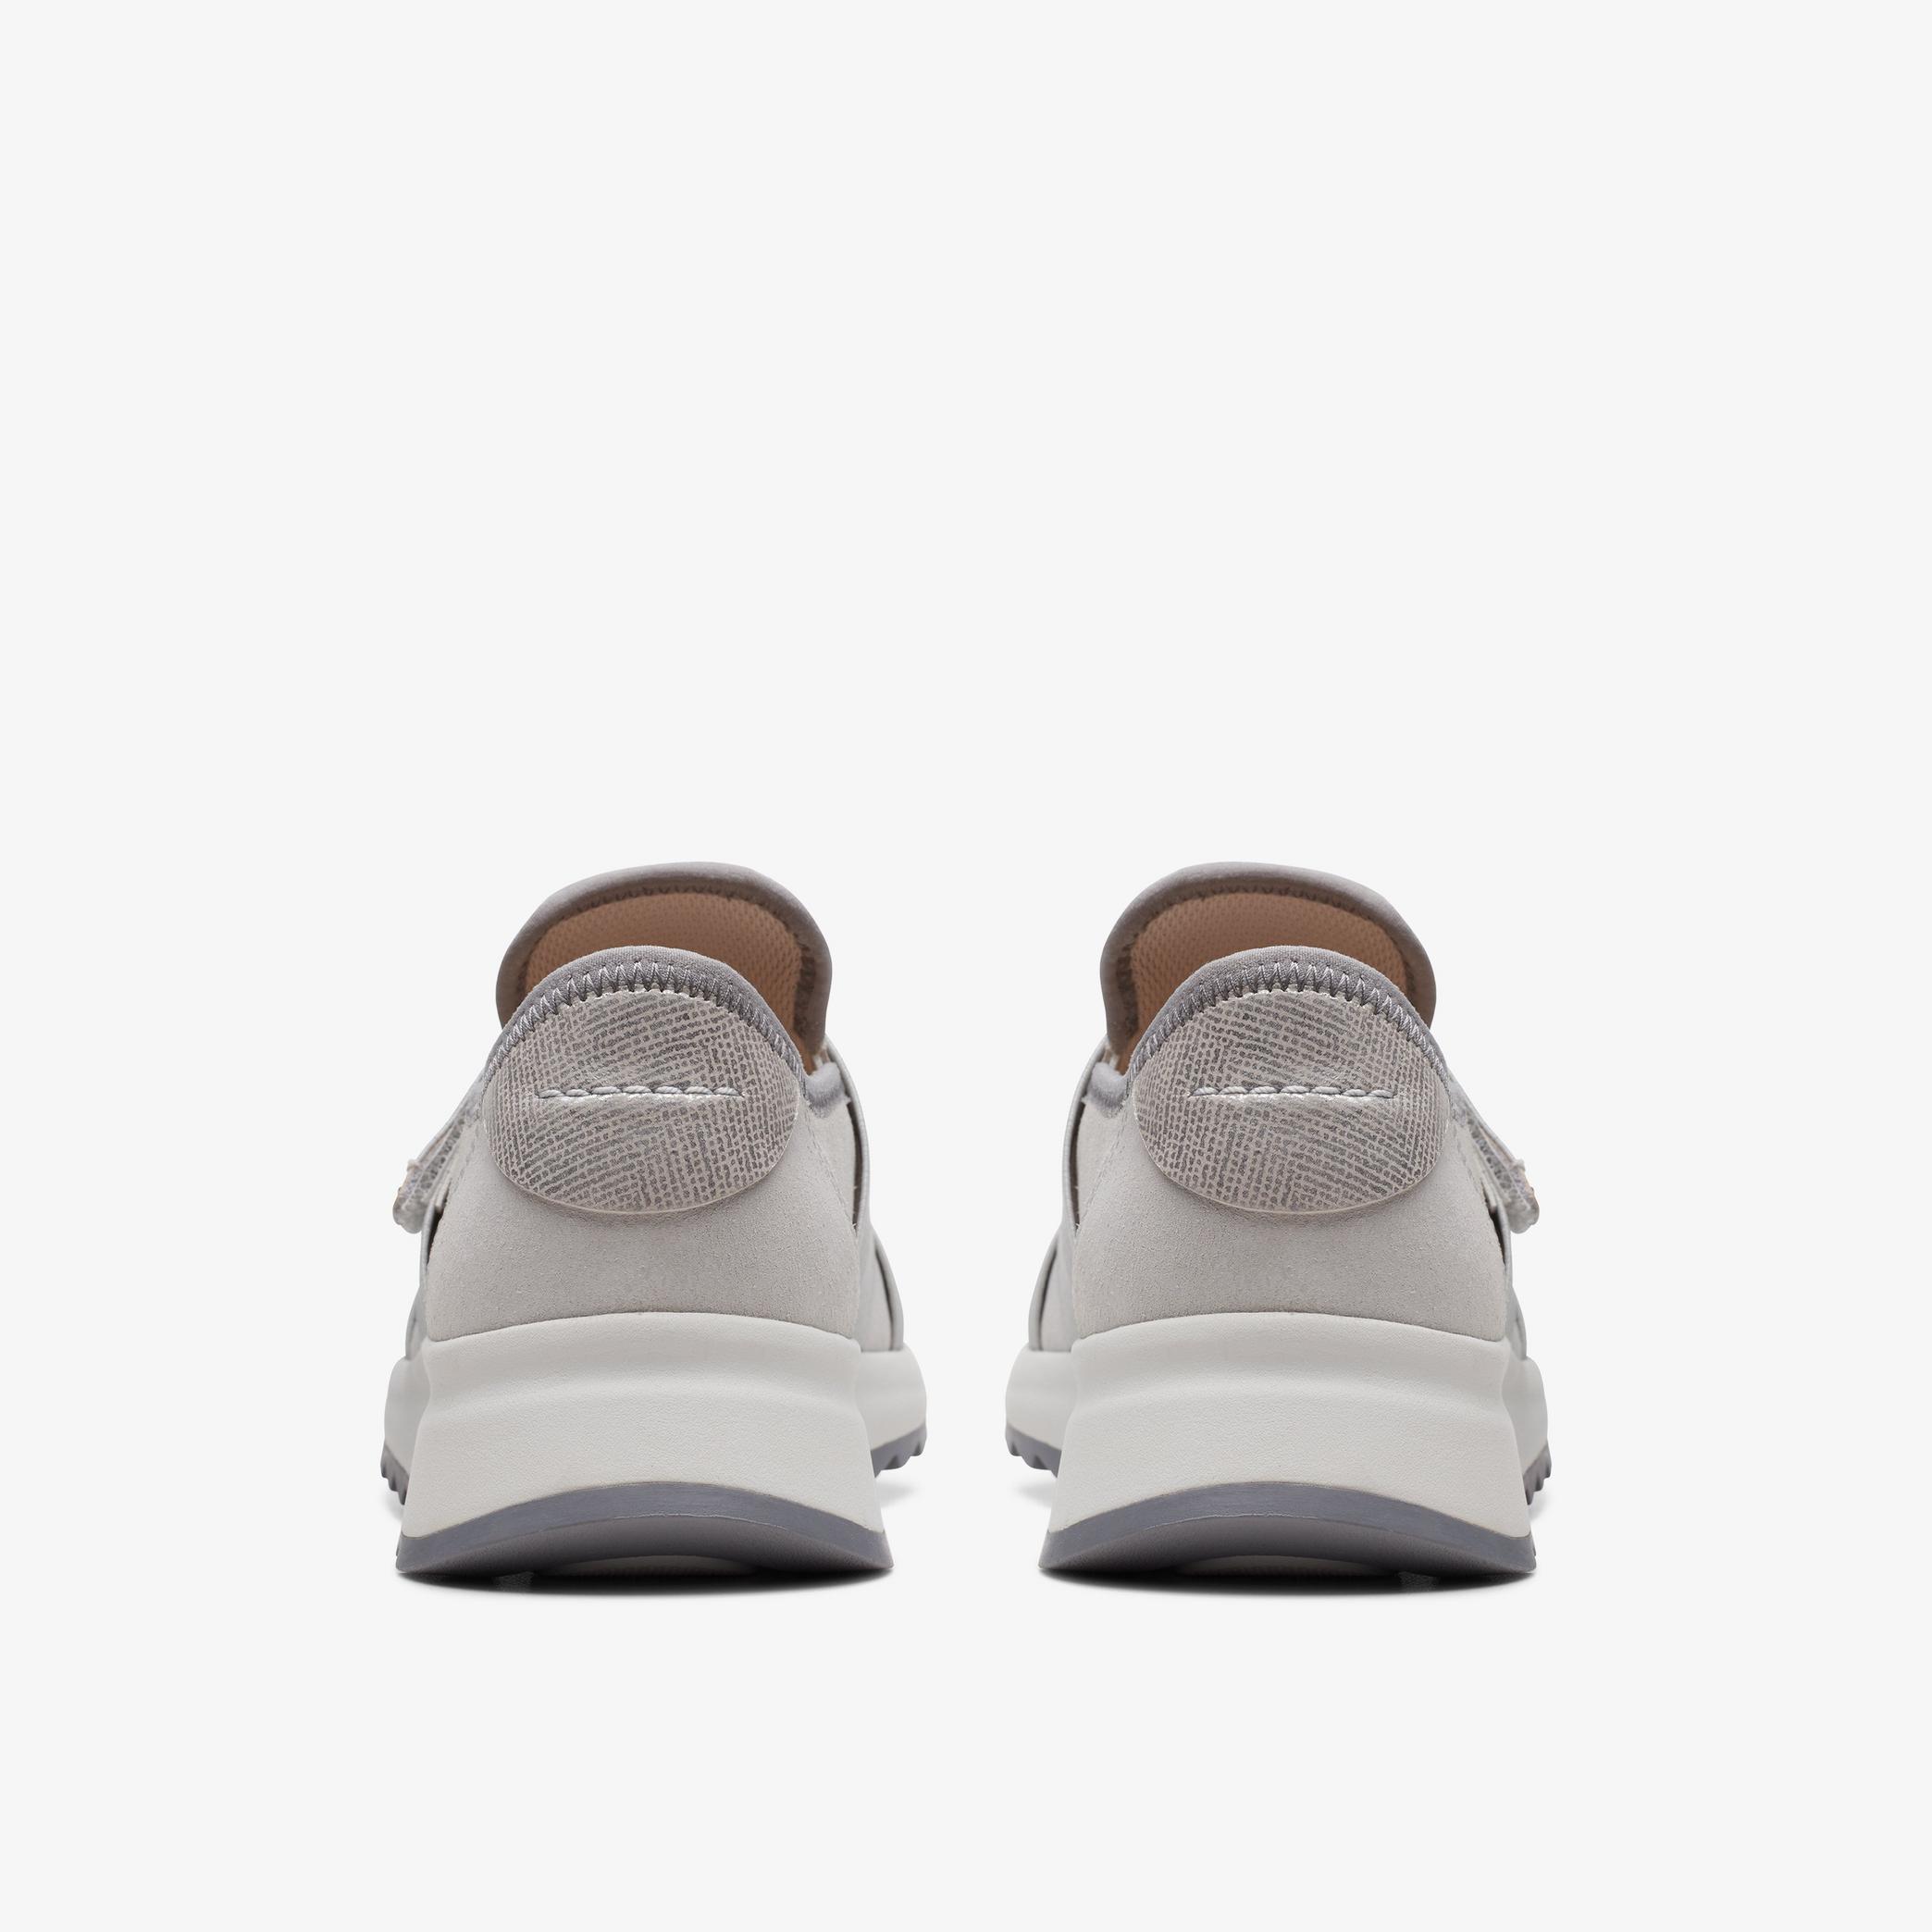 Dash Lite Strap Light Grey Combination Trainers, view 5 of 6